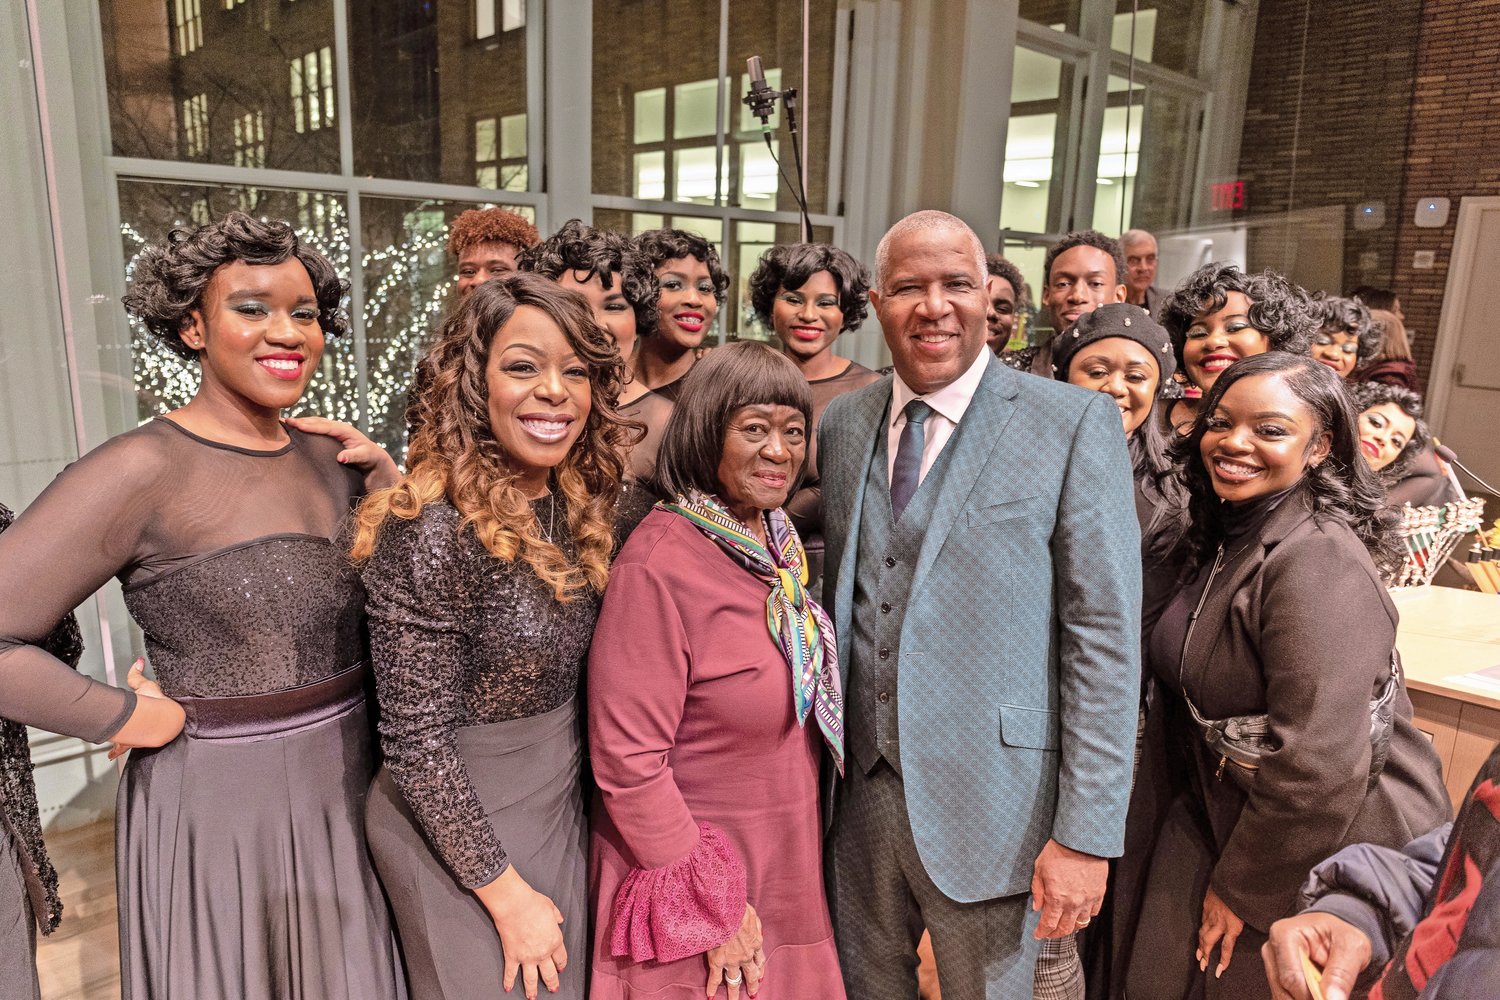 The Uniondale Show Choir surrounded director Lynnette Carr-Hicks, second from left, Deputy Supervisor Dorothy L. Goosby, third from left, philanthropist Robert F. Smith, and Show Choir choreographer Joynell Carr to celebrate the Fifteen Days of Light event at Carnegie Hall on Dec. 18